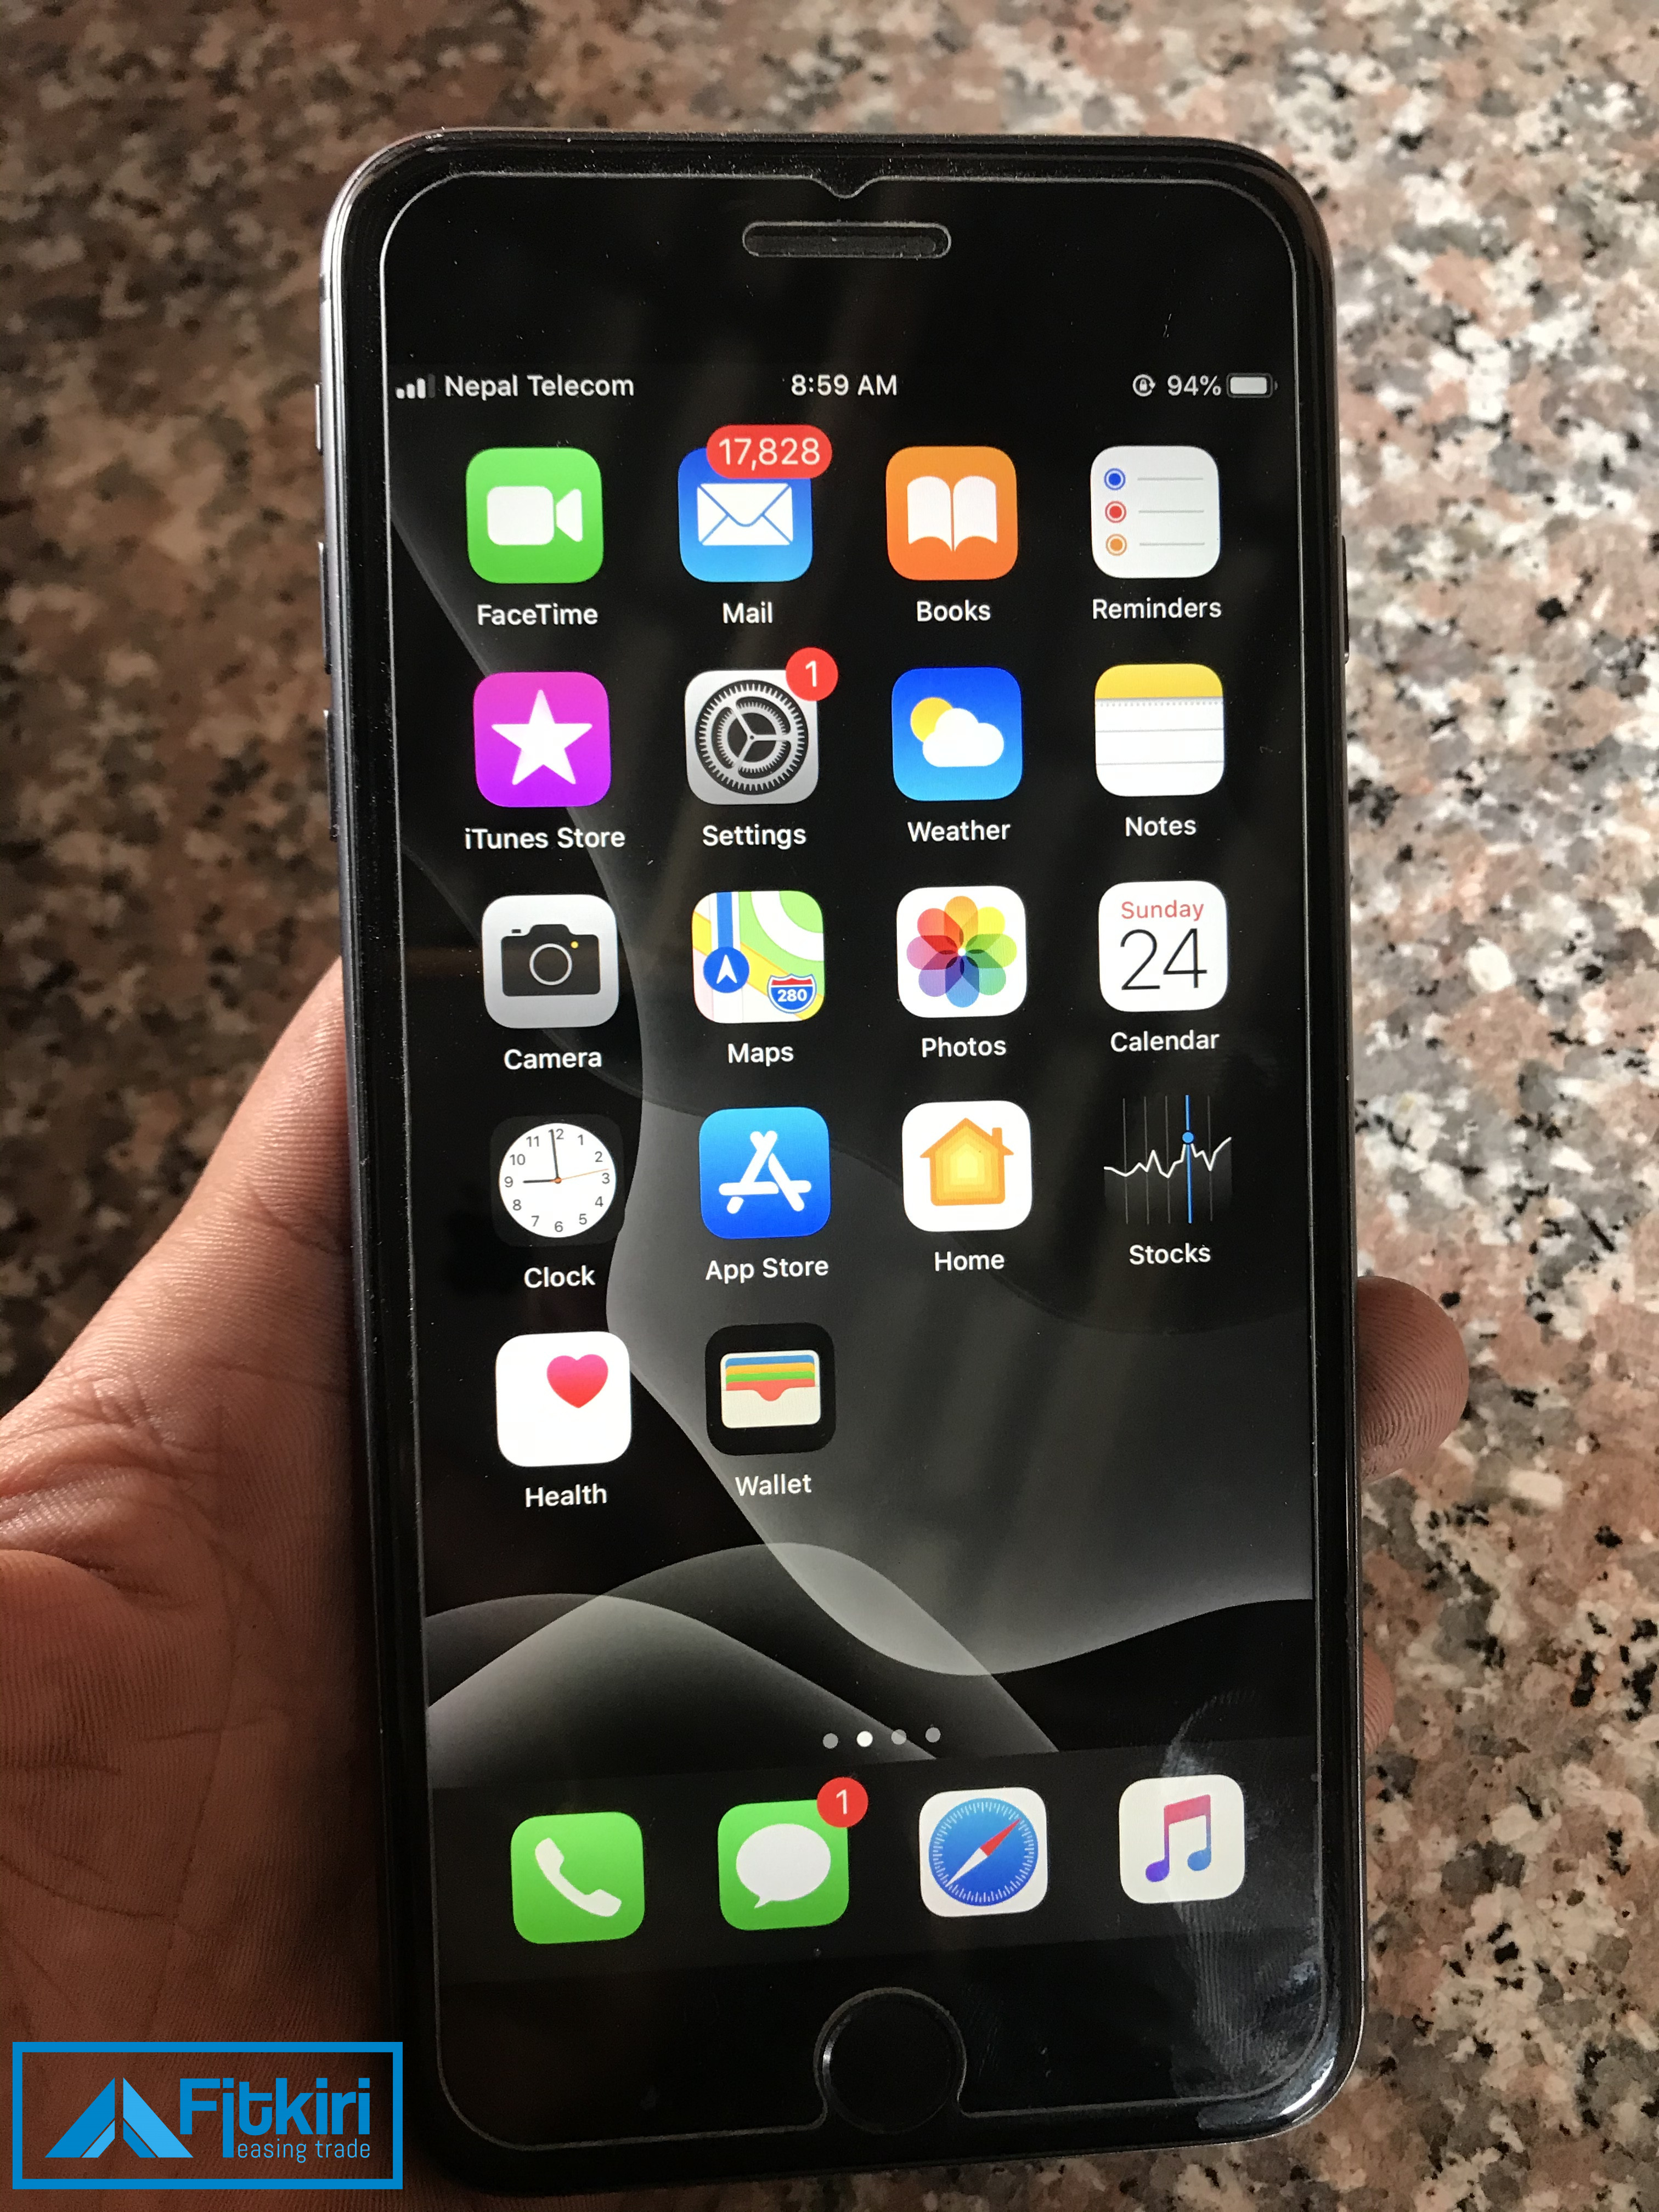 iphone 8 plus 256 gb - Find new and used Mobile Phones for sale in Kathmandu, kalanki | Fitkiri